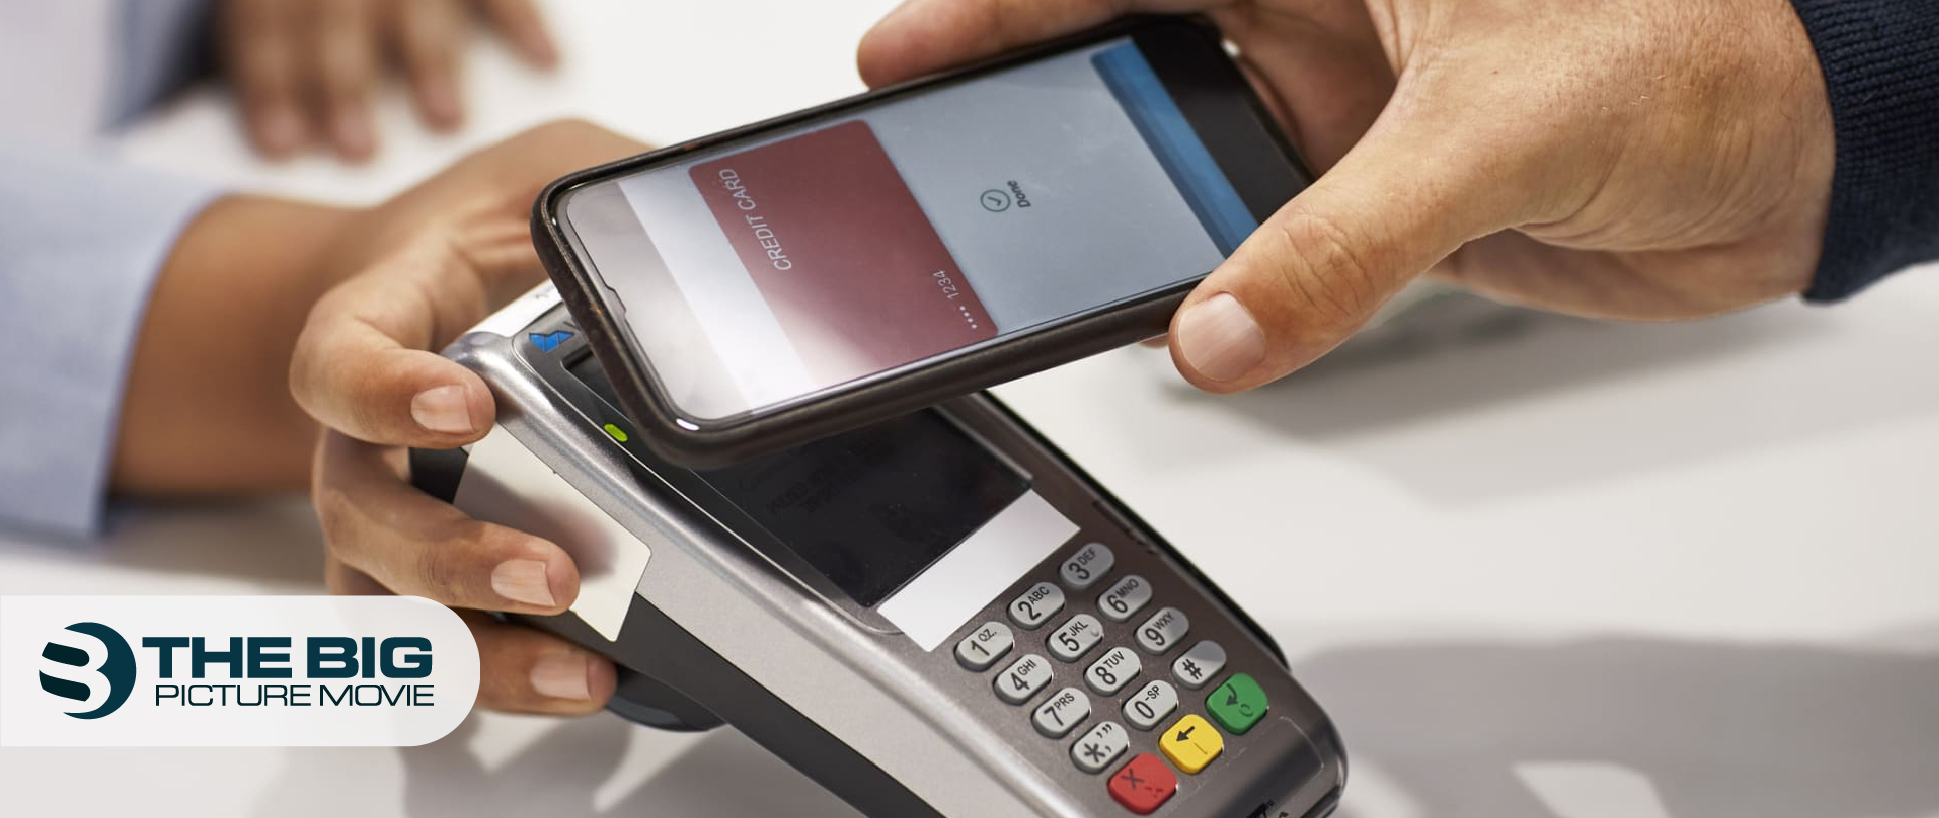 How To Verify Card for Apple Pay on iPhone